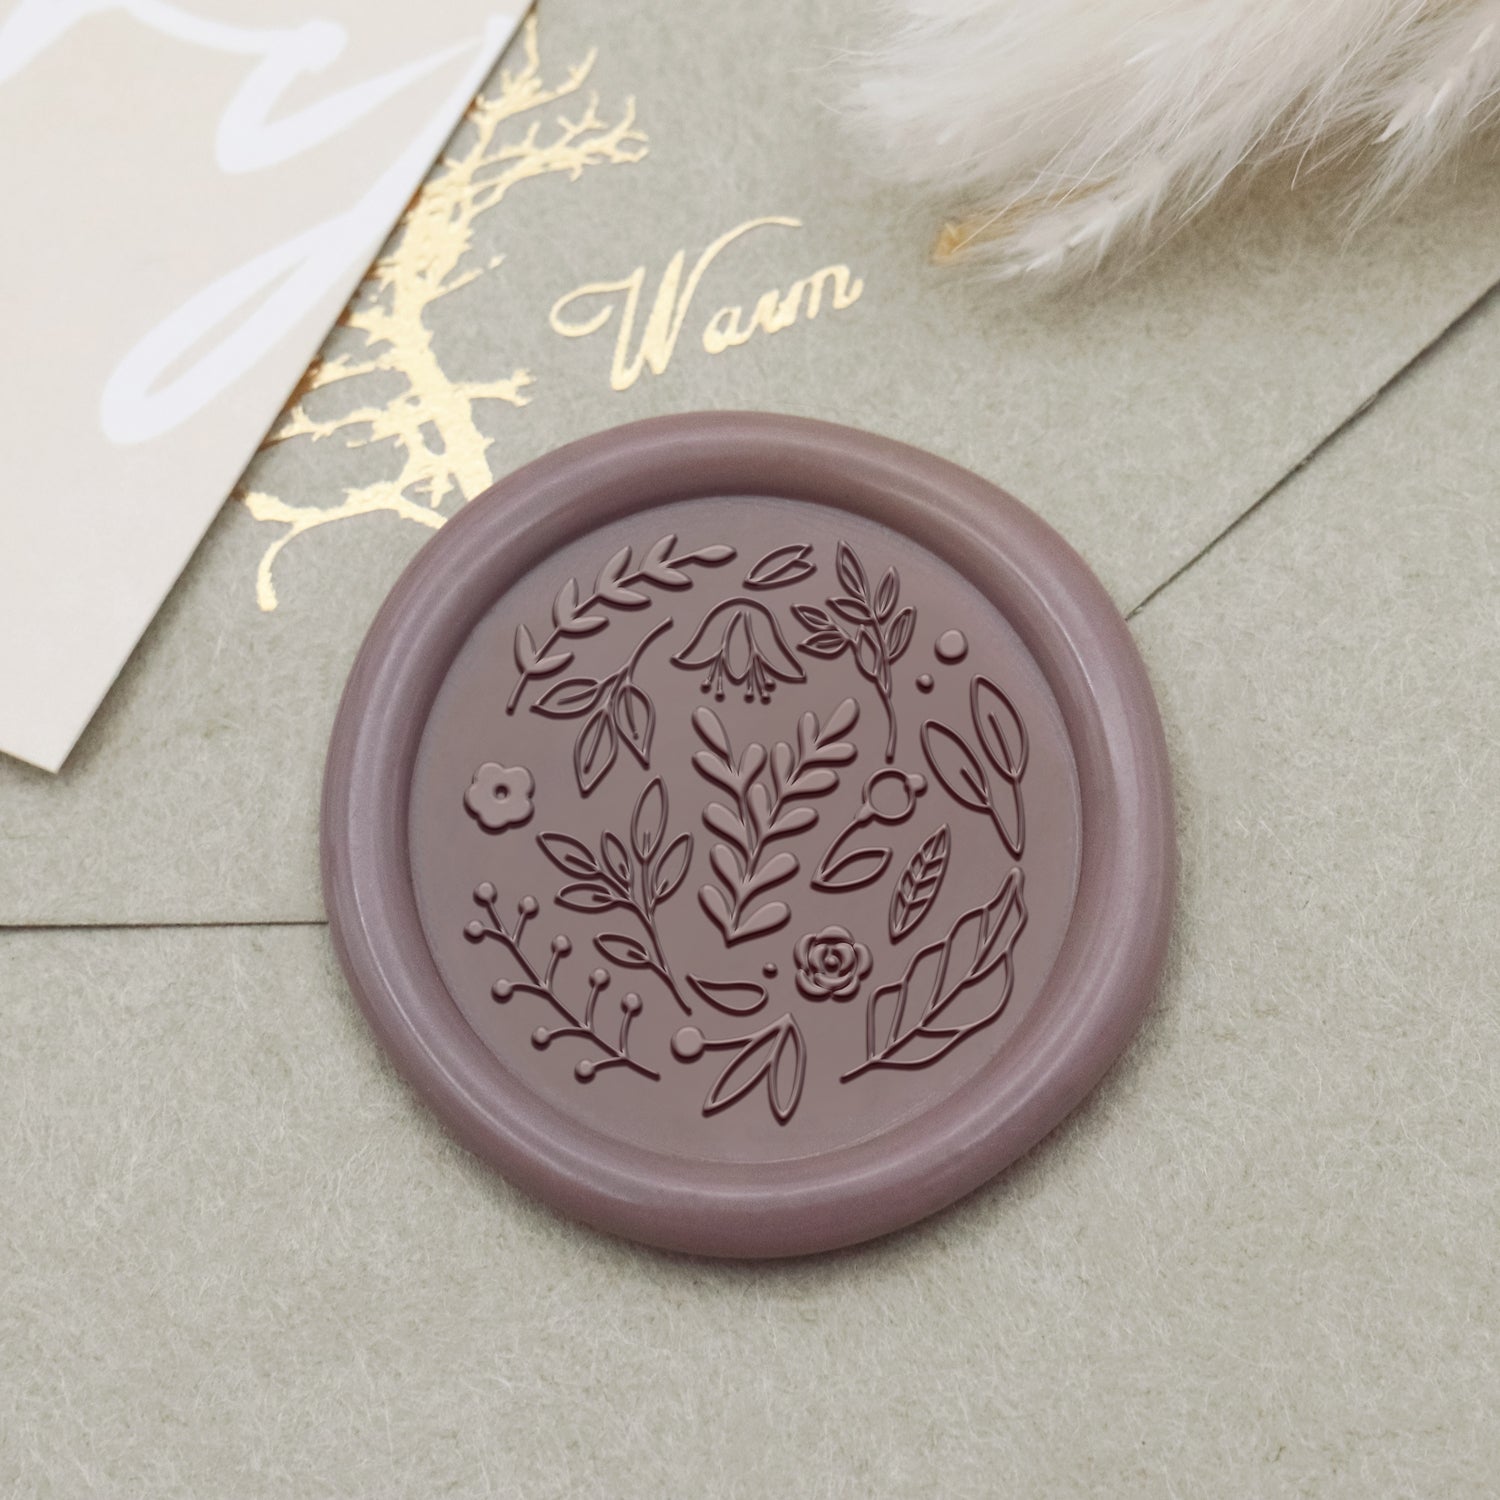 Floral Tile Pattern Wax Seal Stamp - Style 9 1